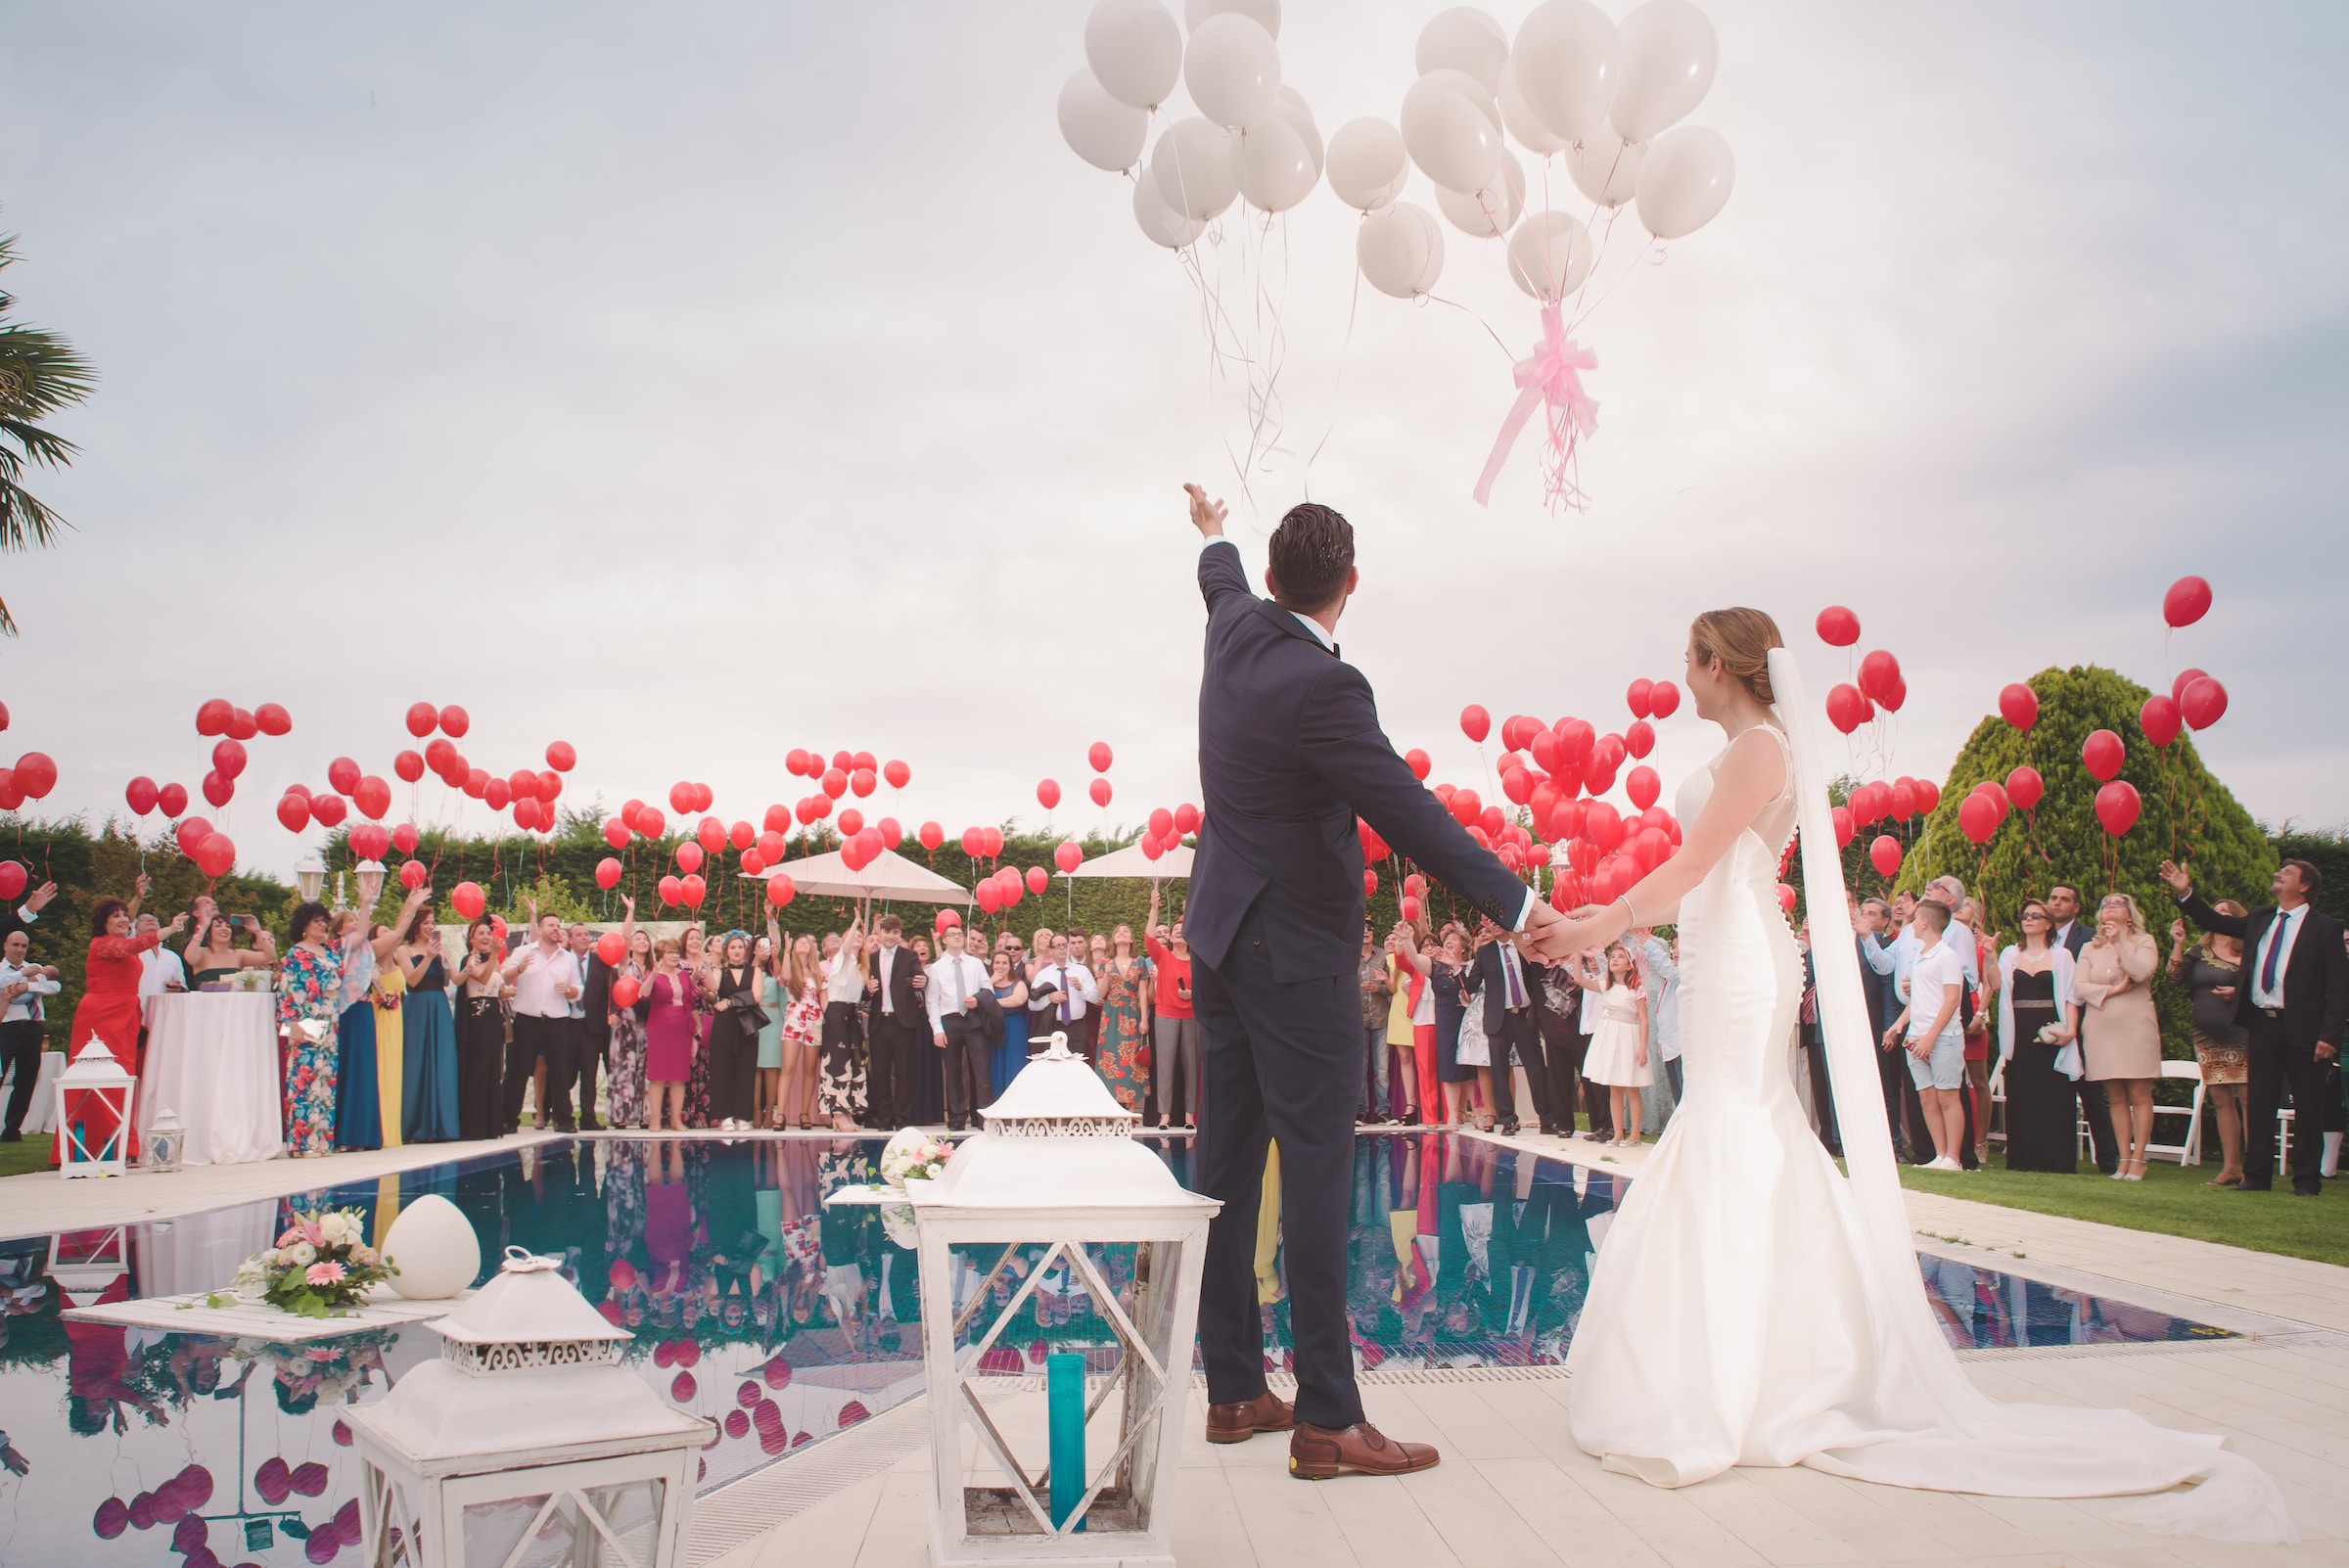 Balloons being released at a wedding. | Source: Unsplash